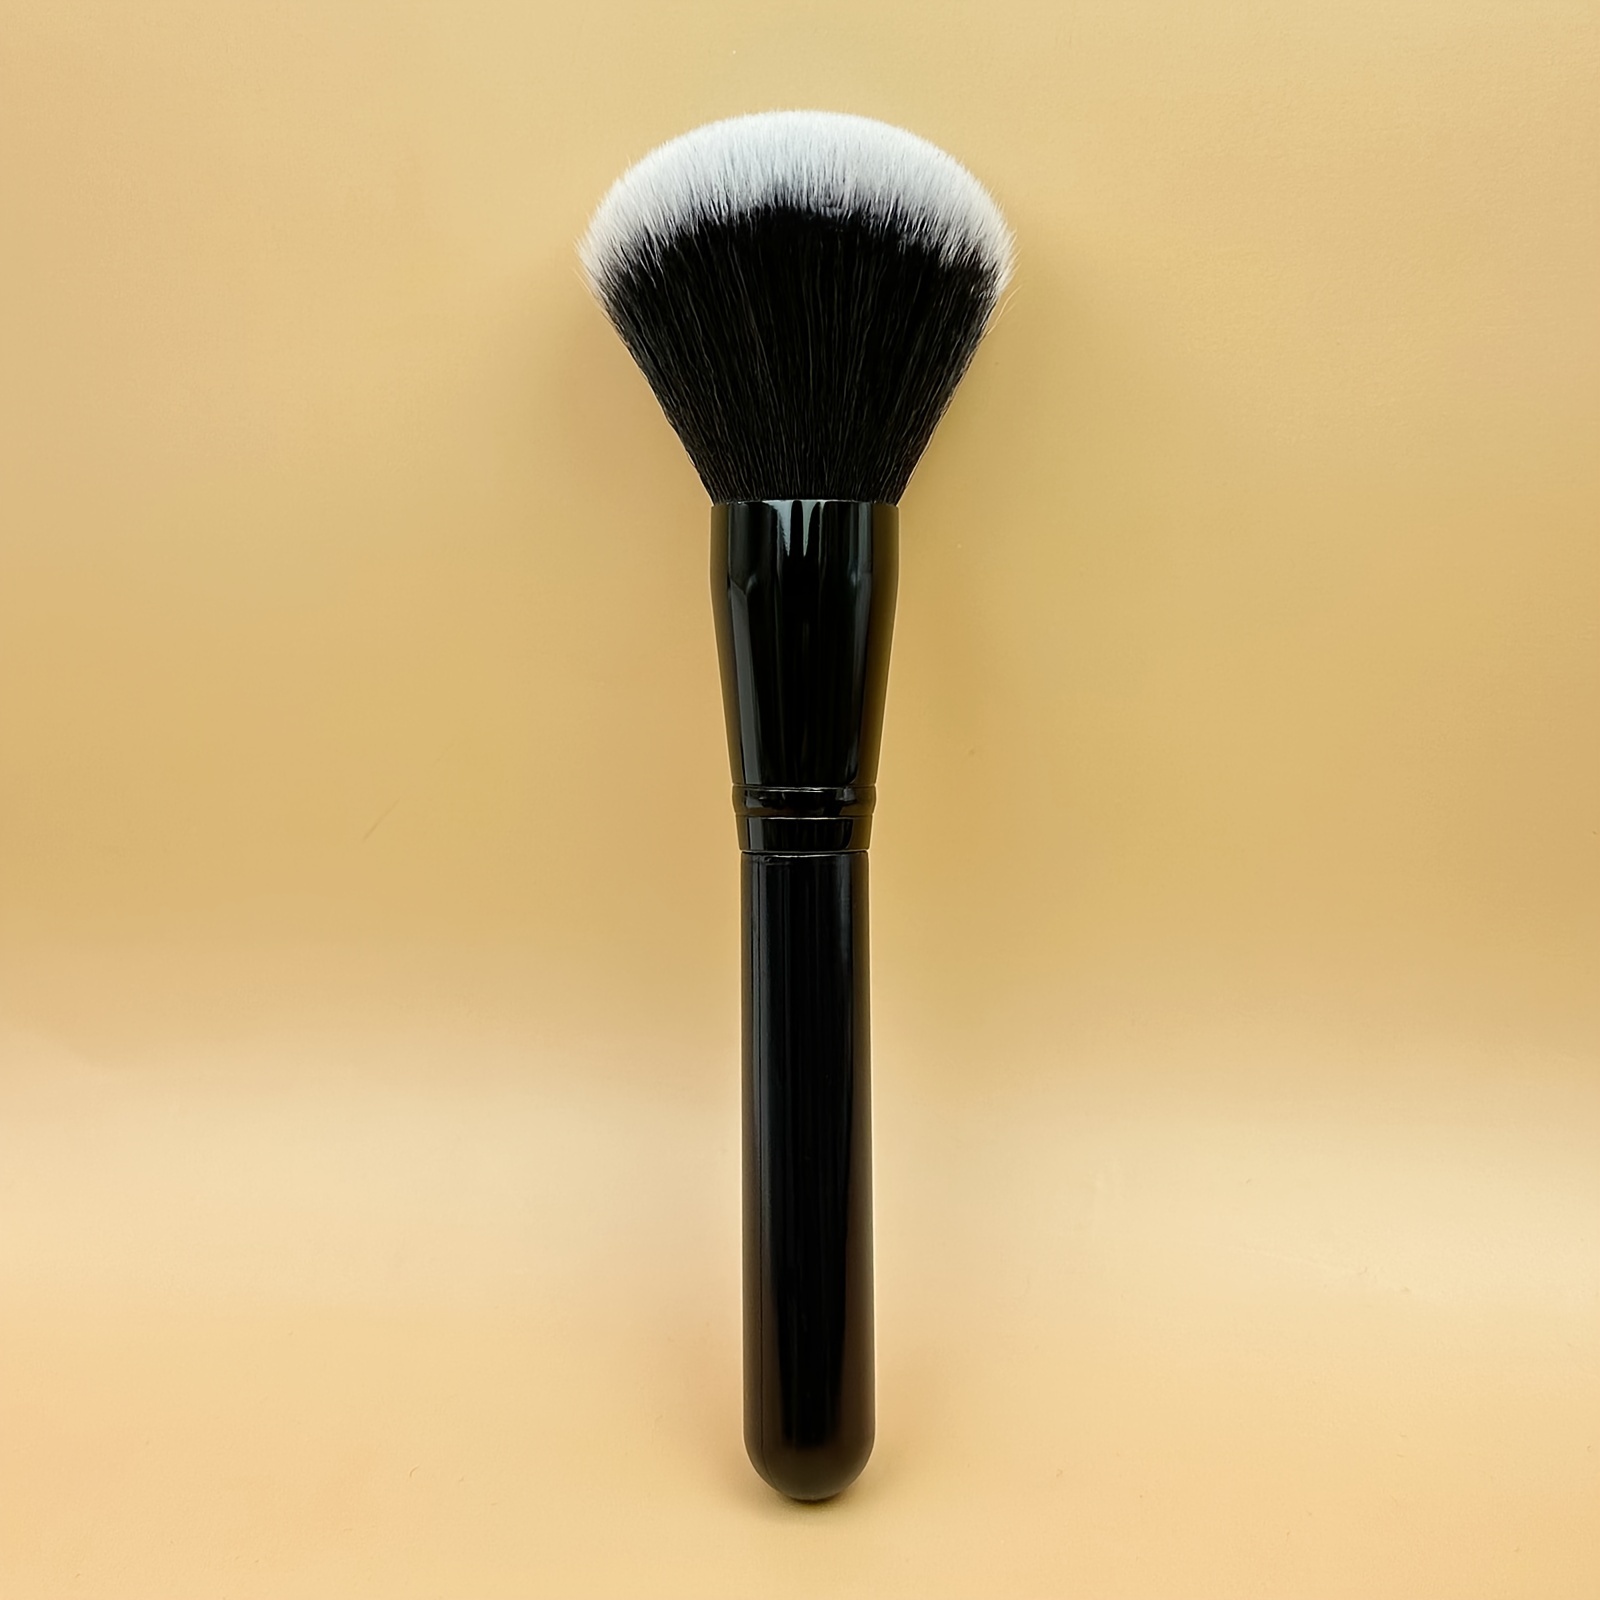 1 PCLarge Loose Powder Brush Fluffy And Soft Portable Blush